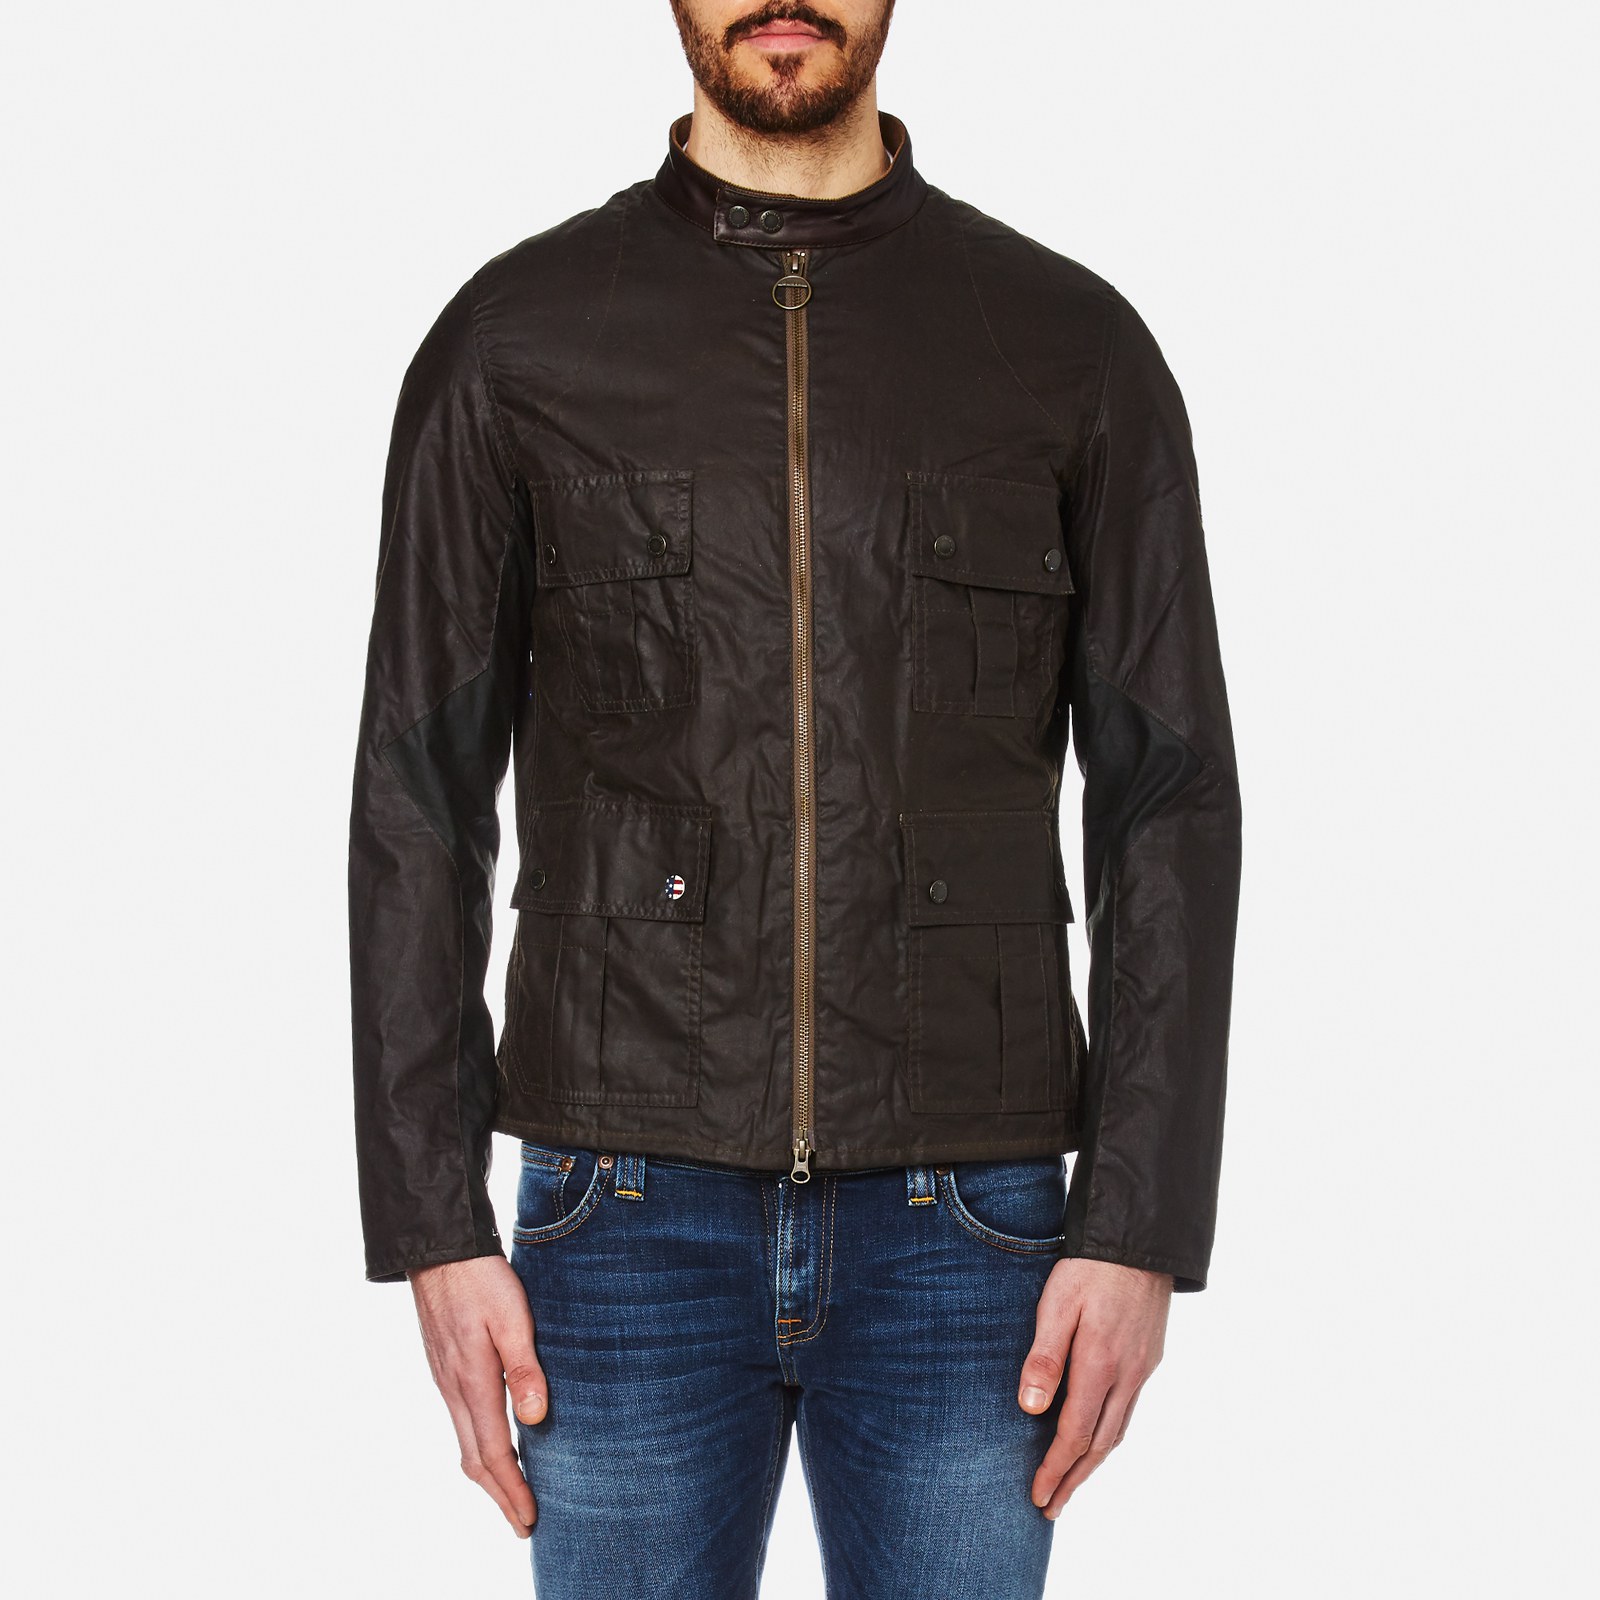 barbour chico jacket off 58% - www 